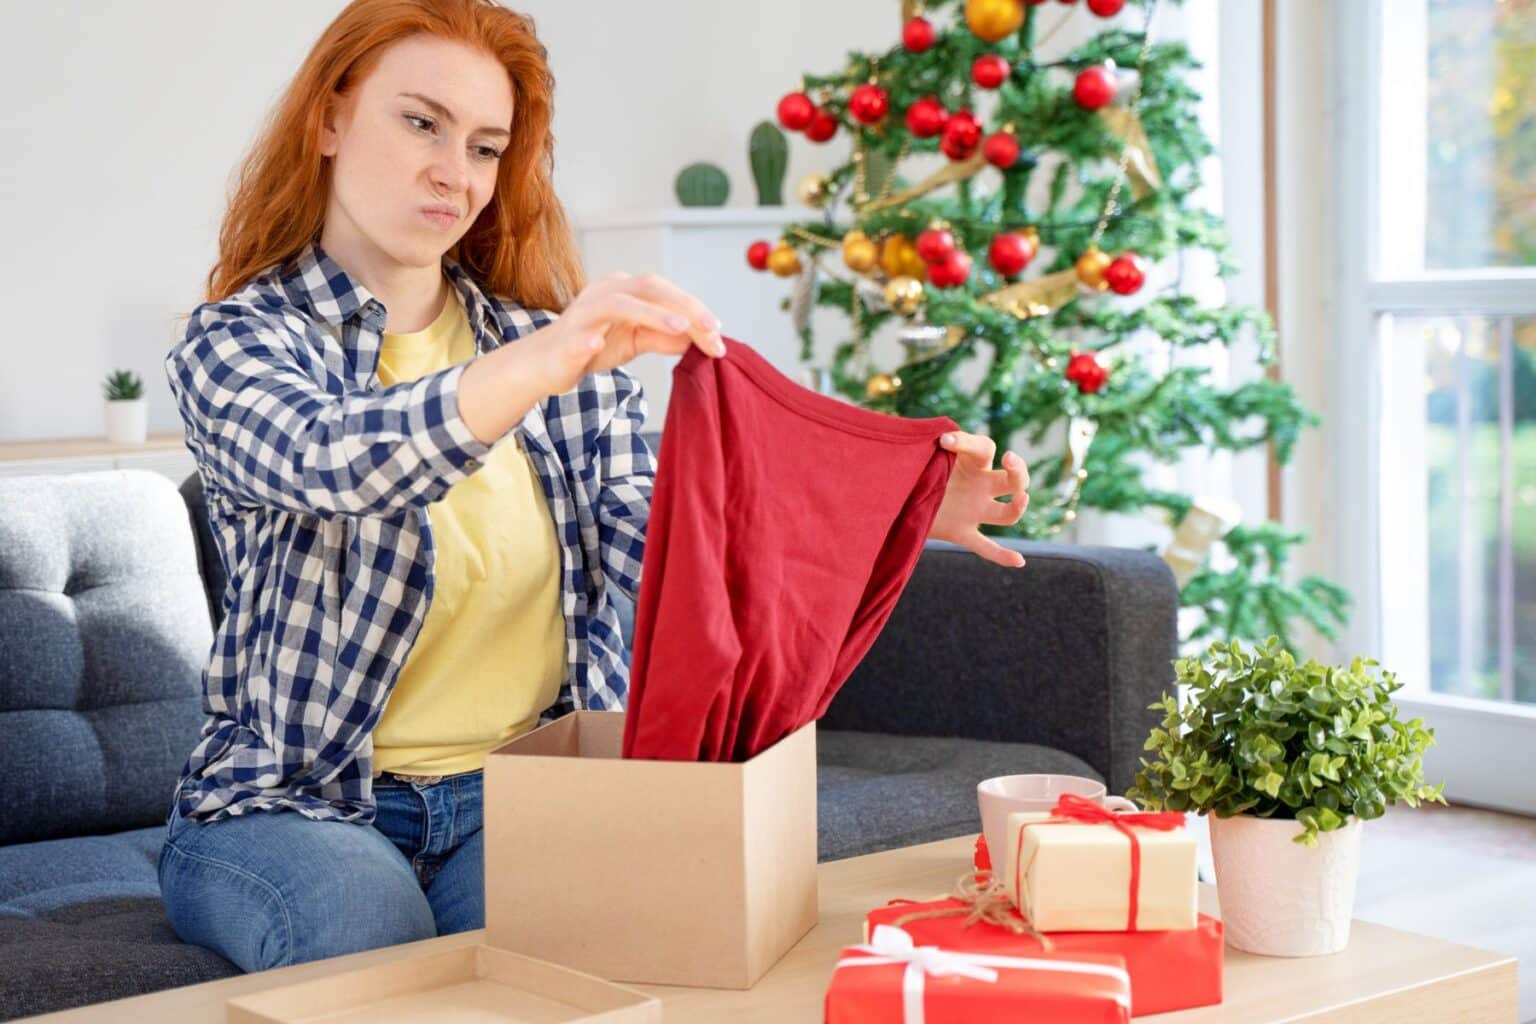 woman upset about a bad gift she received